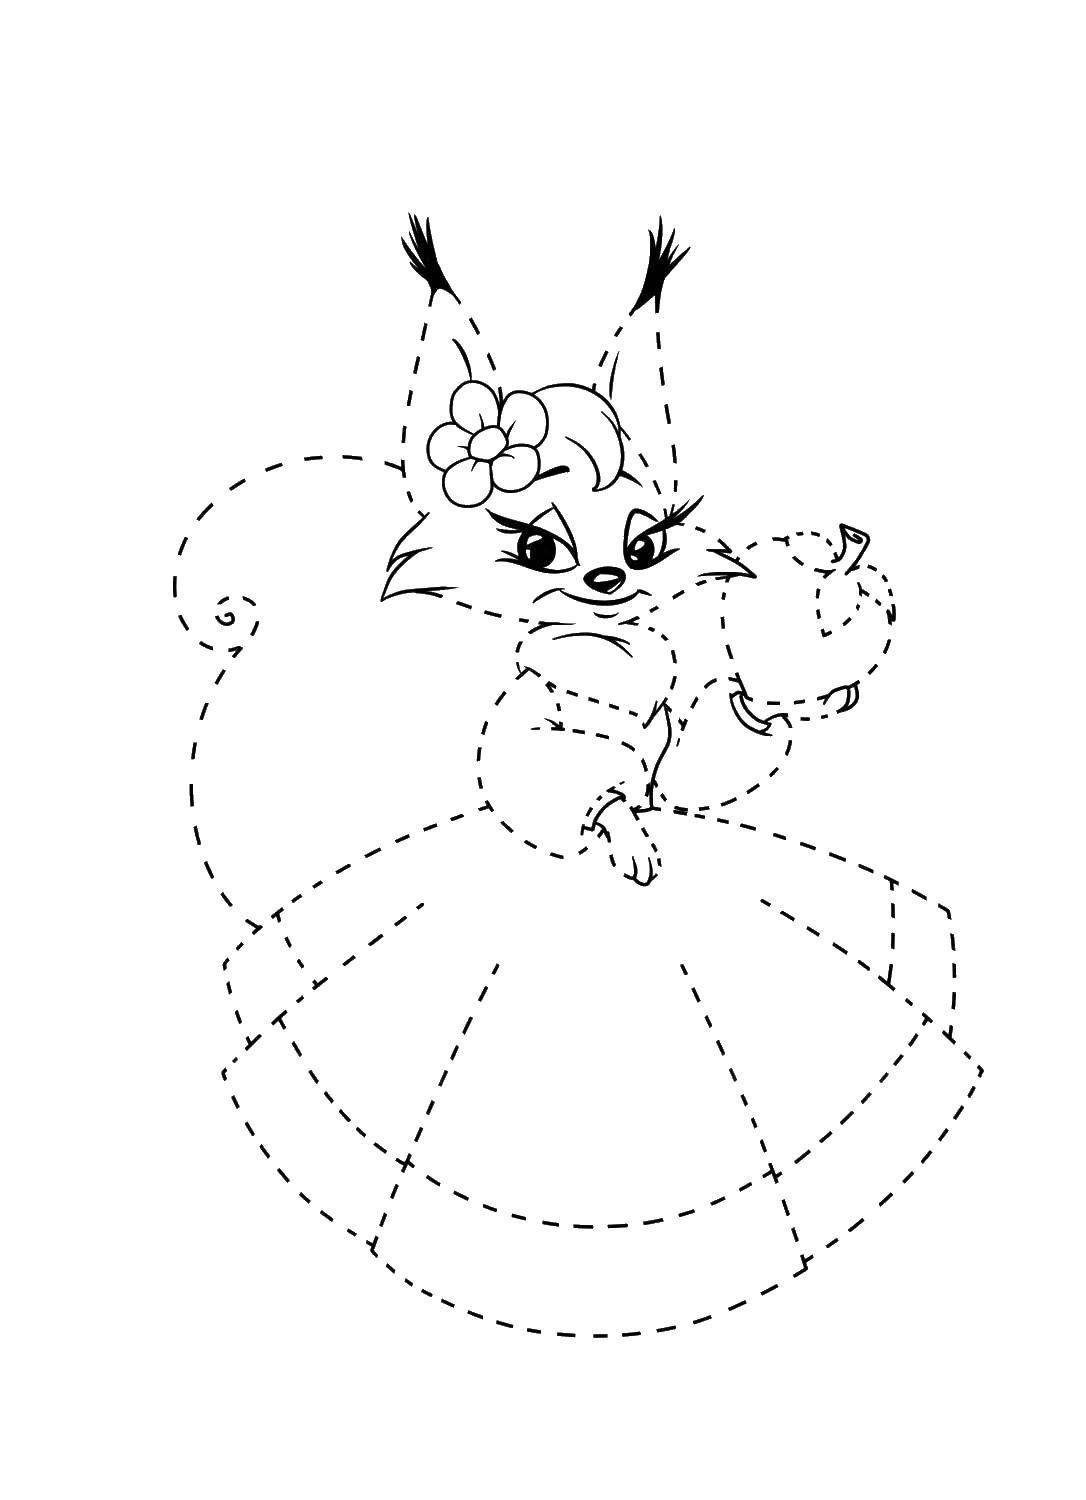 Coloring Protein in a dress. Category squirrel. Tags:  squirrel dress.